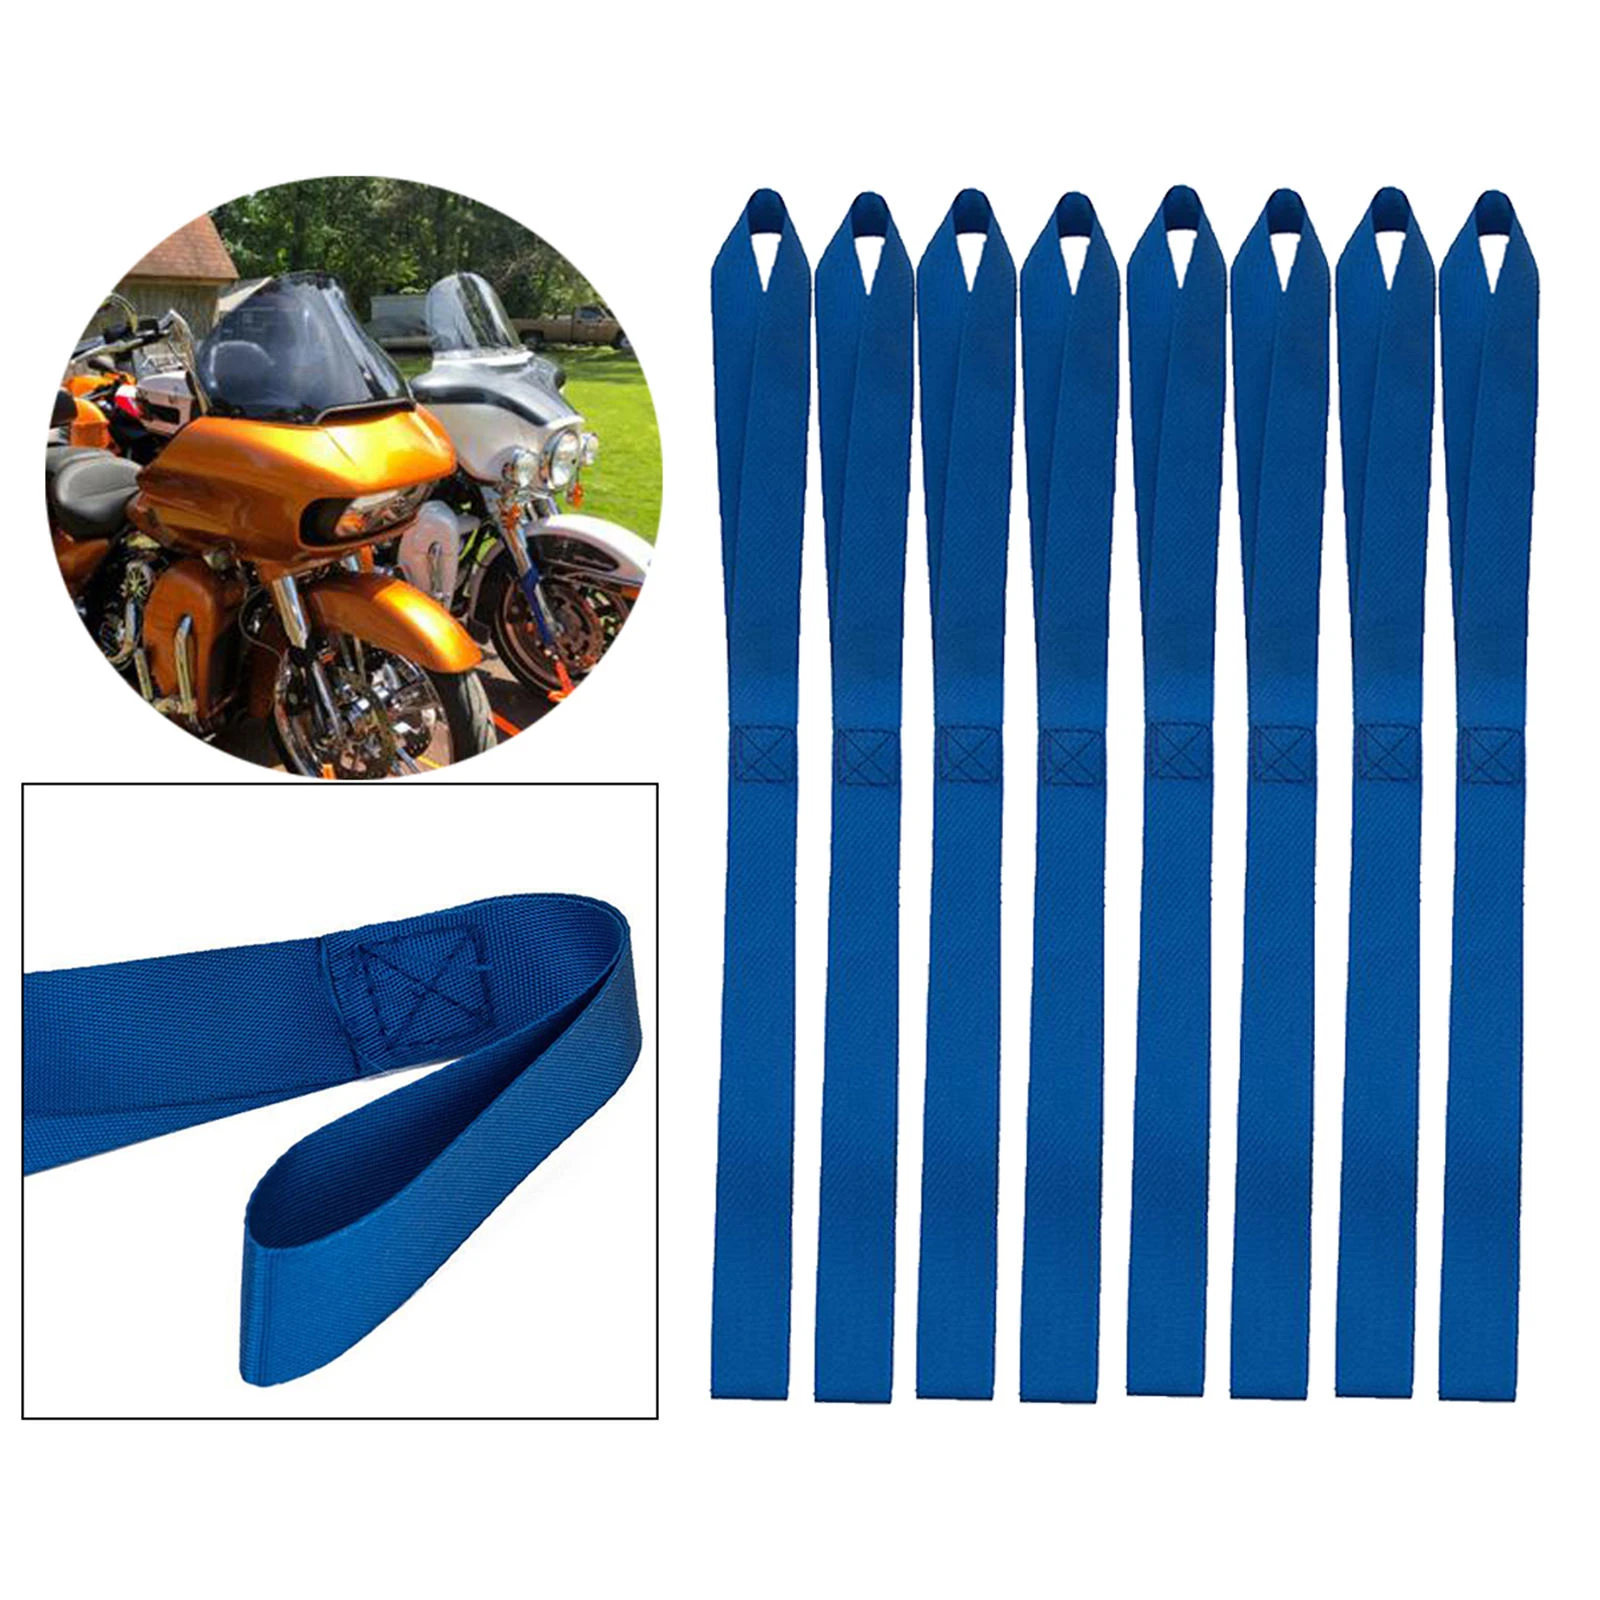 8Pieces Soft Loop Tie Down Straps for Motorcycle Snowmobile Towing Cargo ATV UTV